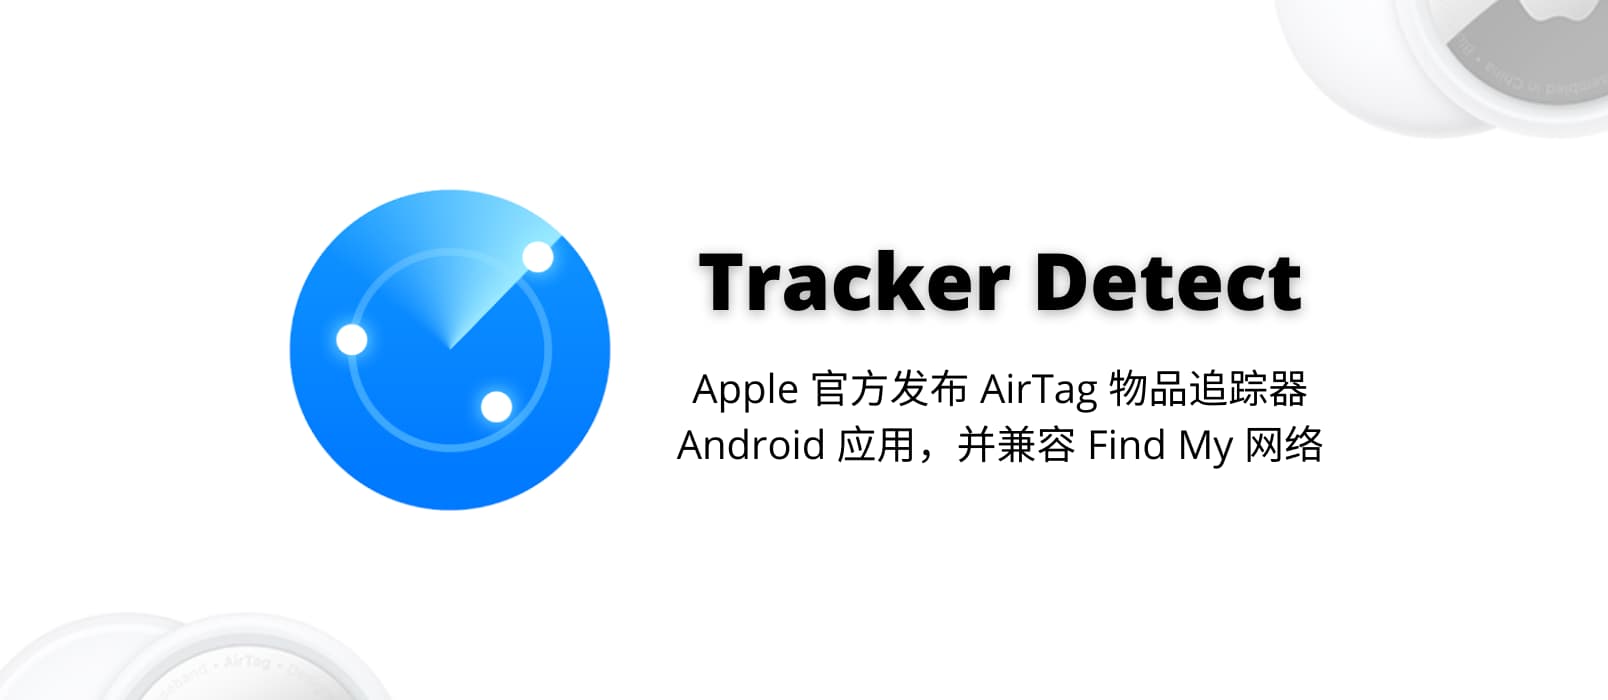 Tracker Detect - Apple 官方发布 AirTag 物品追踪器的 Android 应用